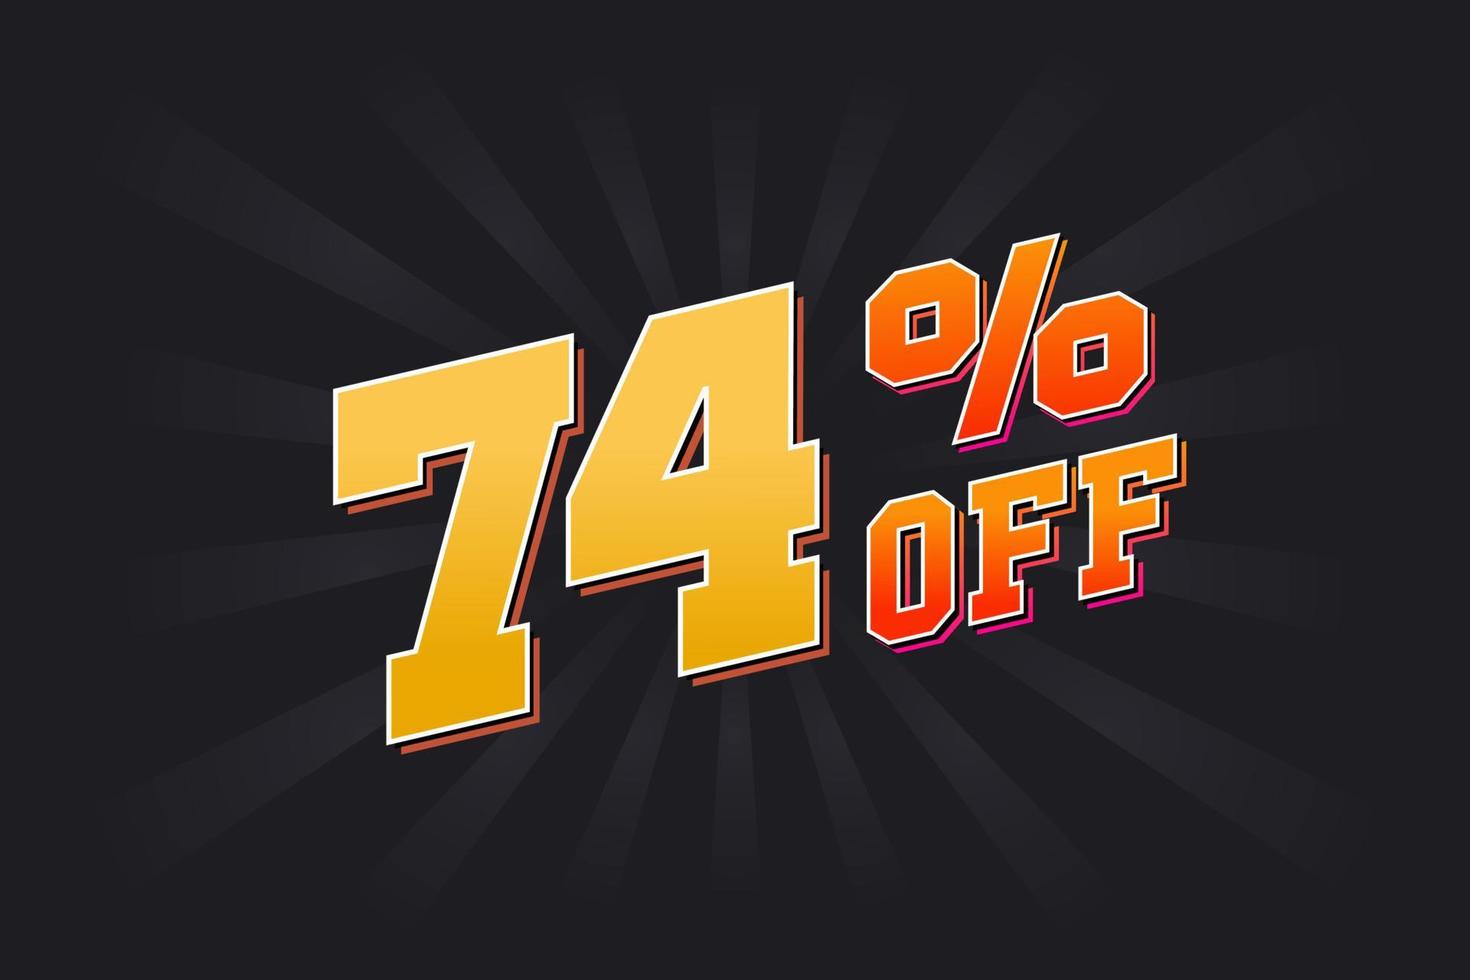 74 Percent off Special Discount Offer. 74 off Sale of advertising campaign vector graphics.